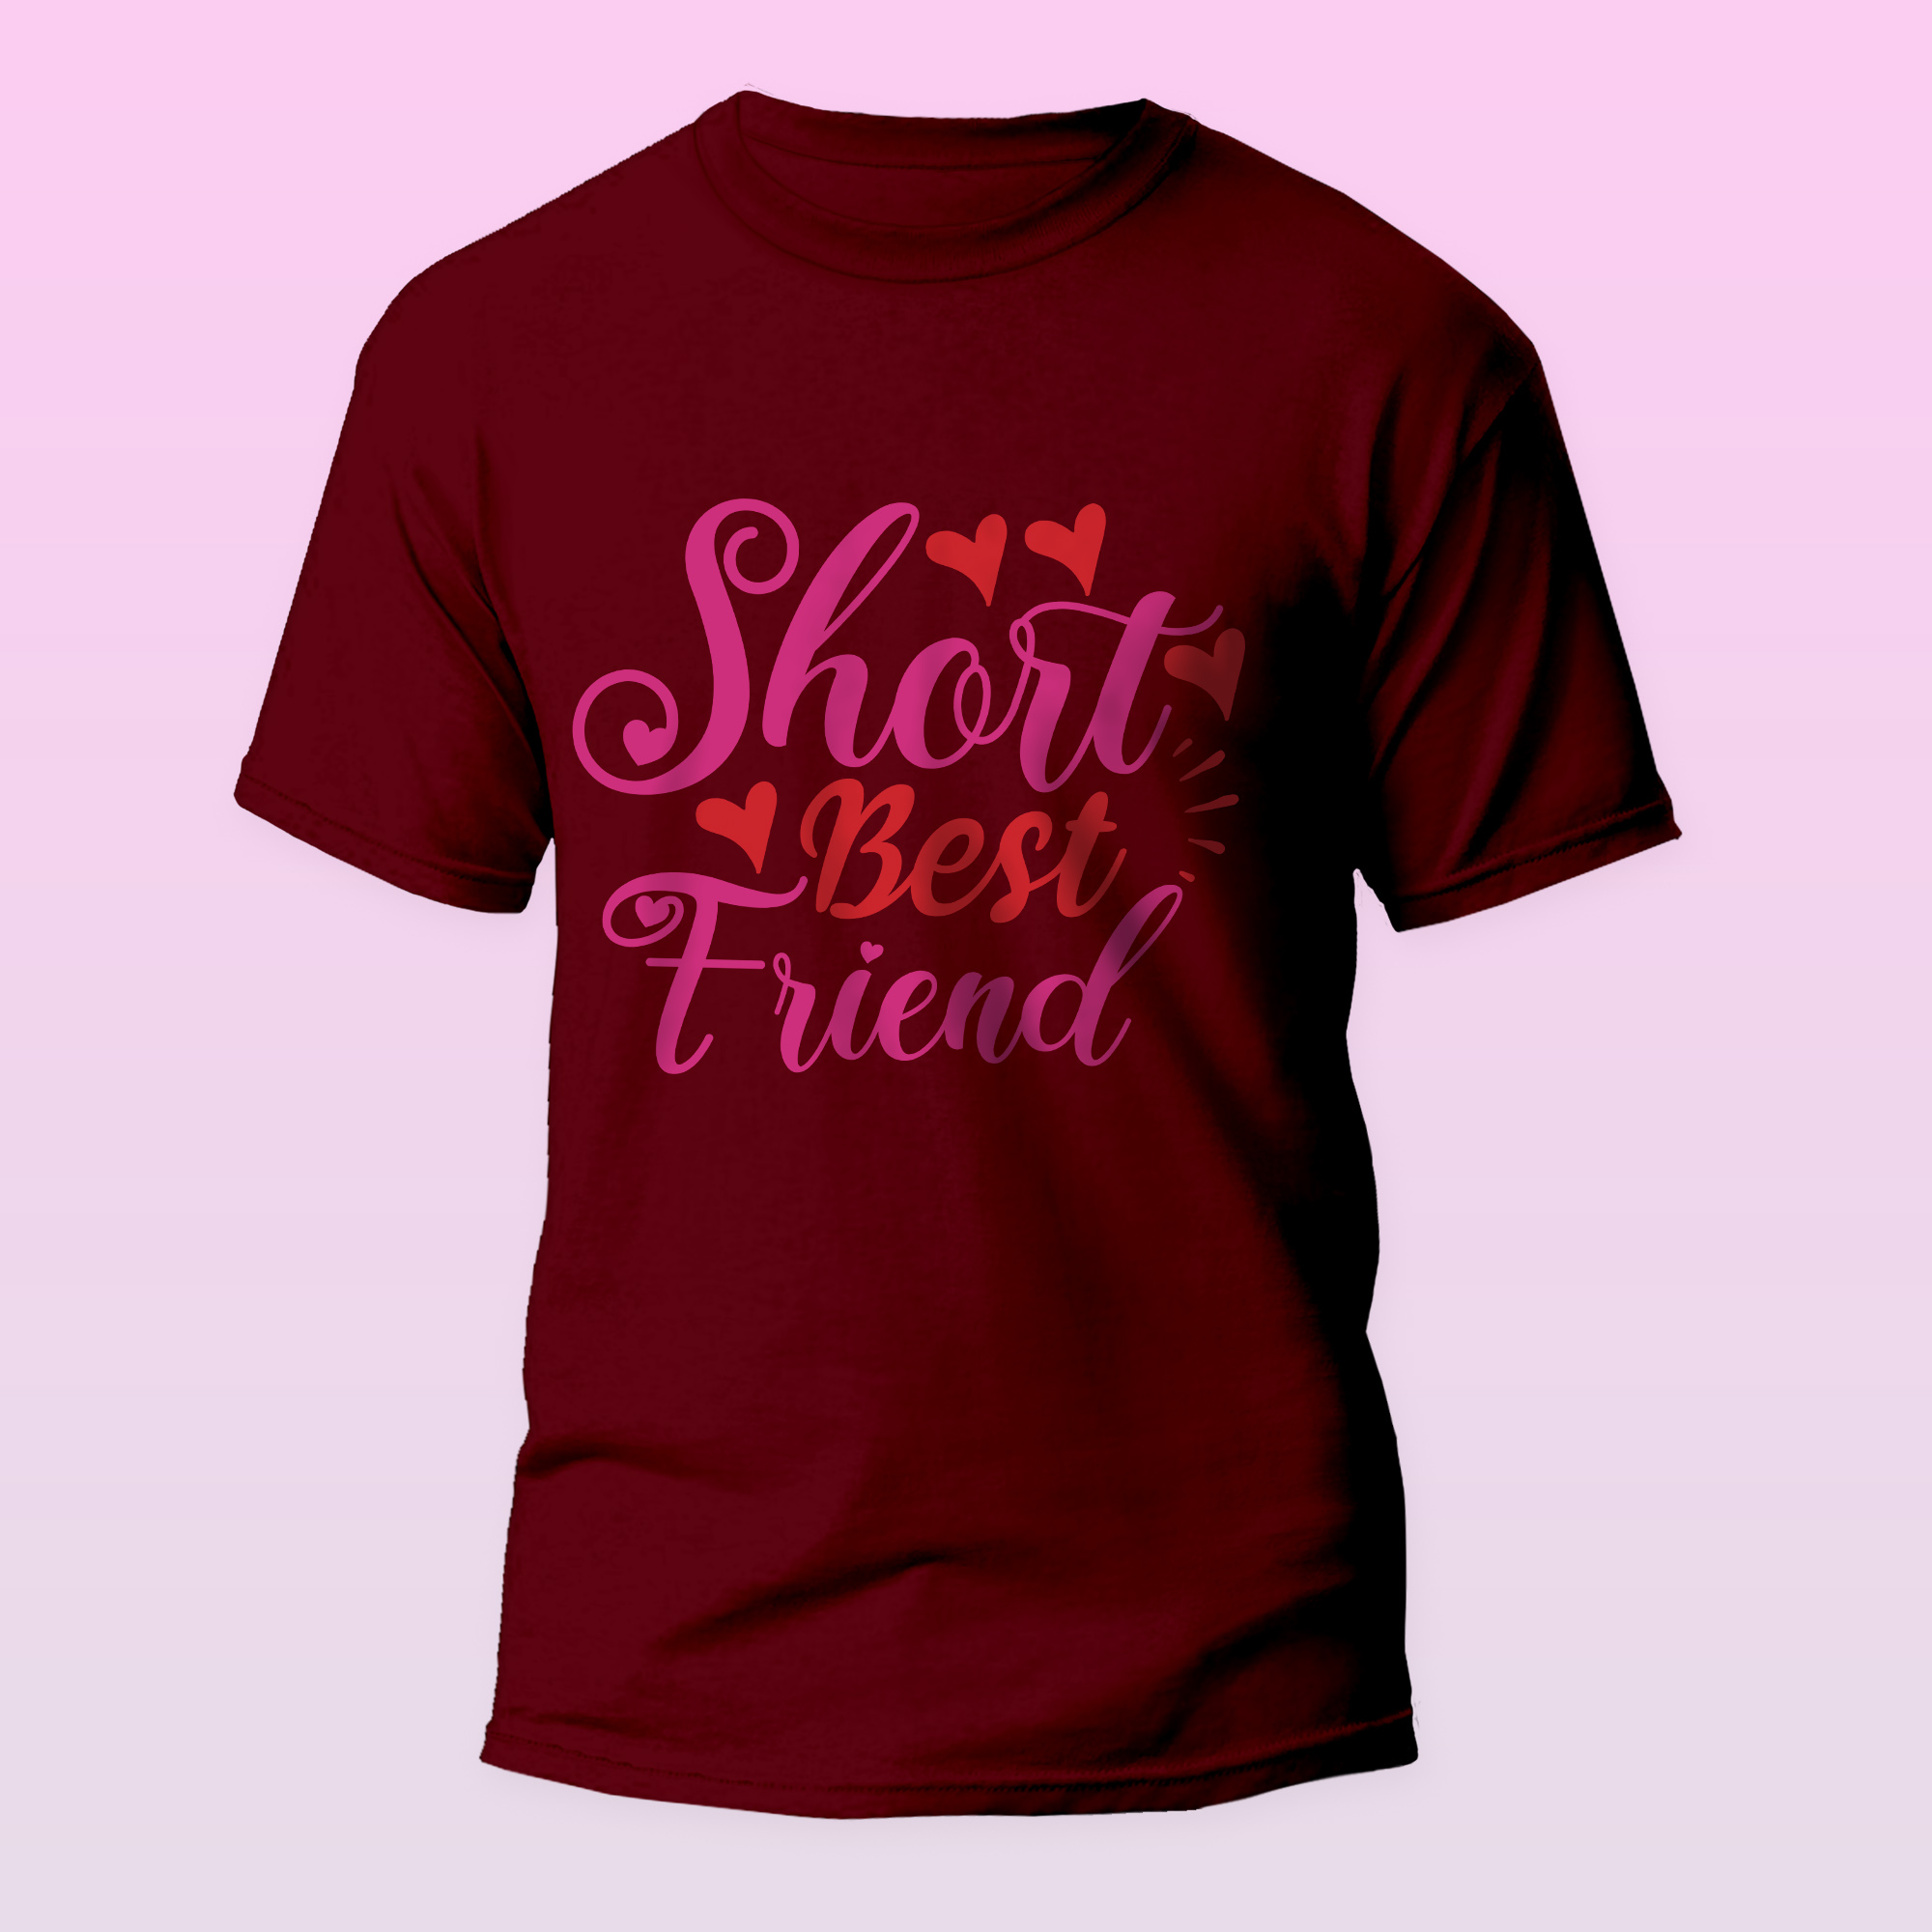 Cotton Graphic Printed Funny T Shirt Slogan For Friends In Mumbai